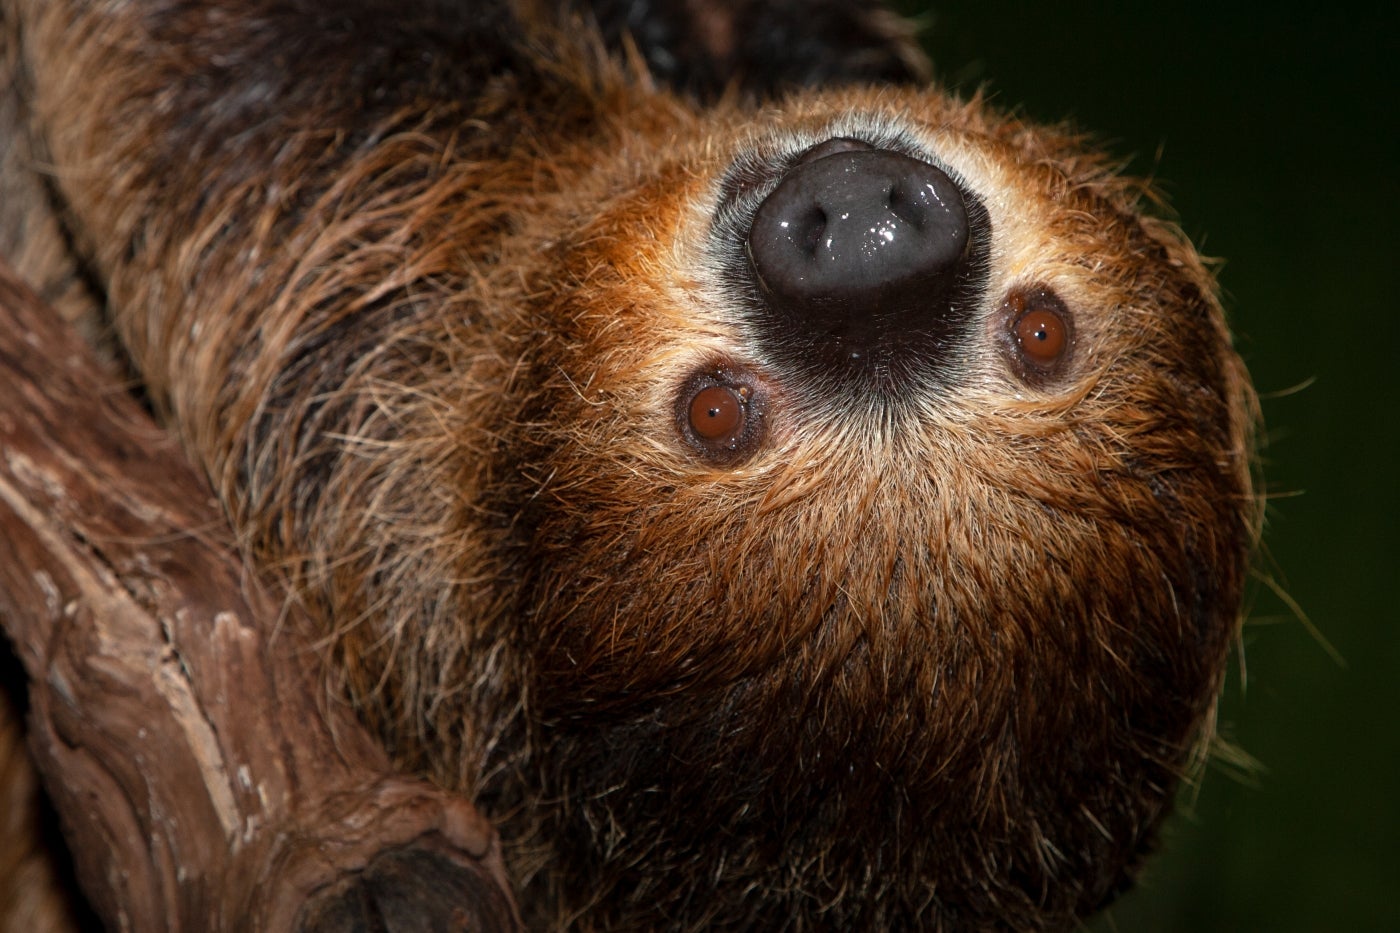 A southern two-toed sloth with long, coarse brown fur, a round snout and small eyes hanging upside down from a tree branch